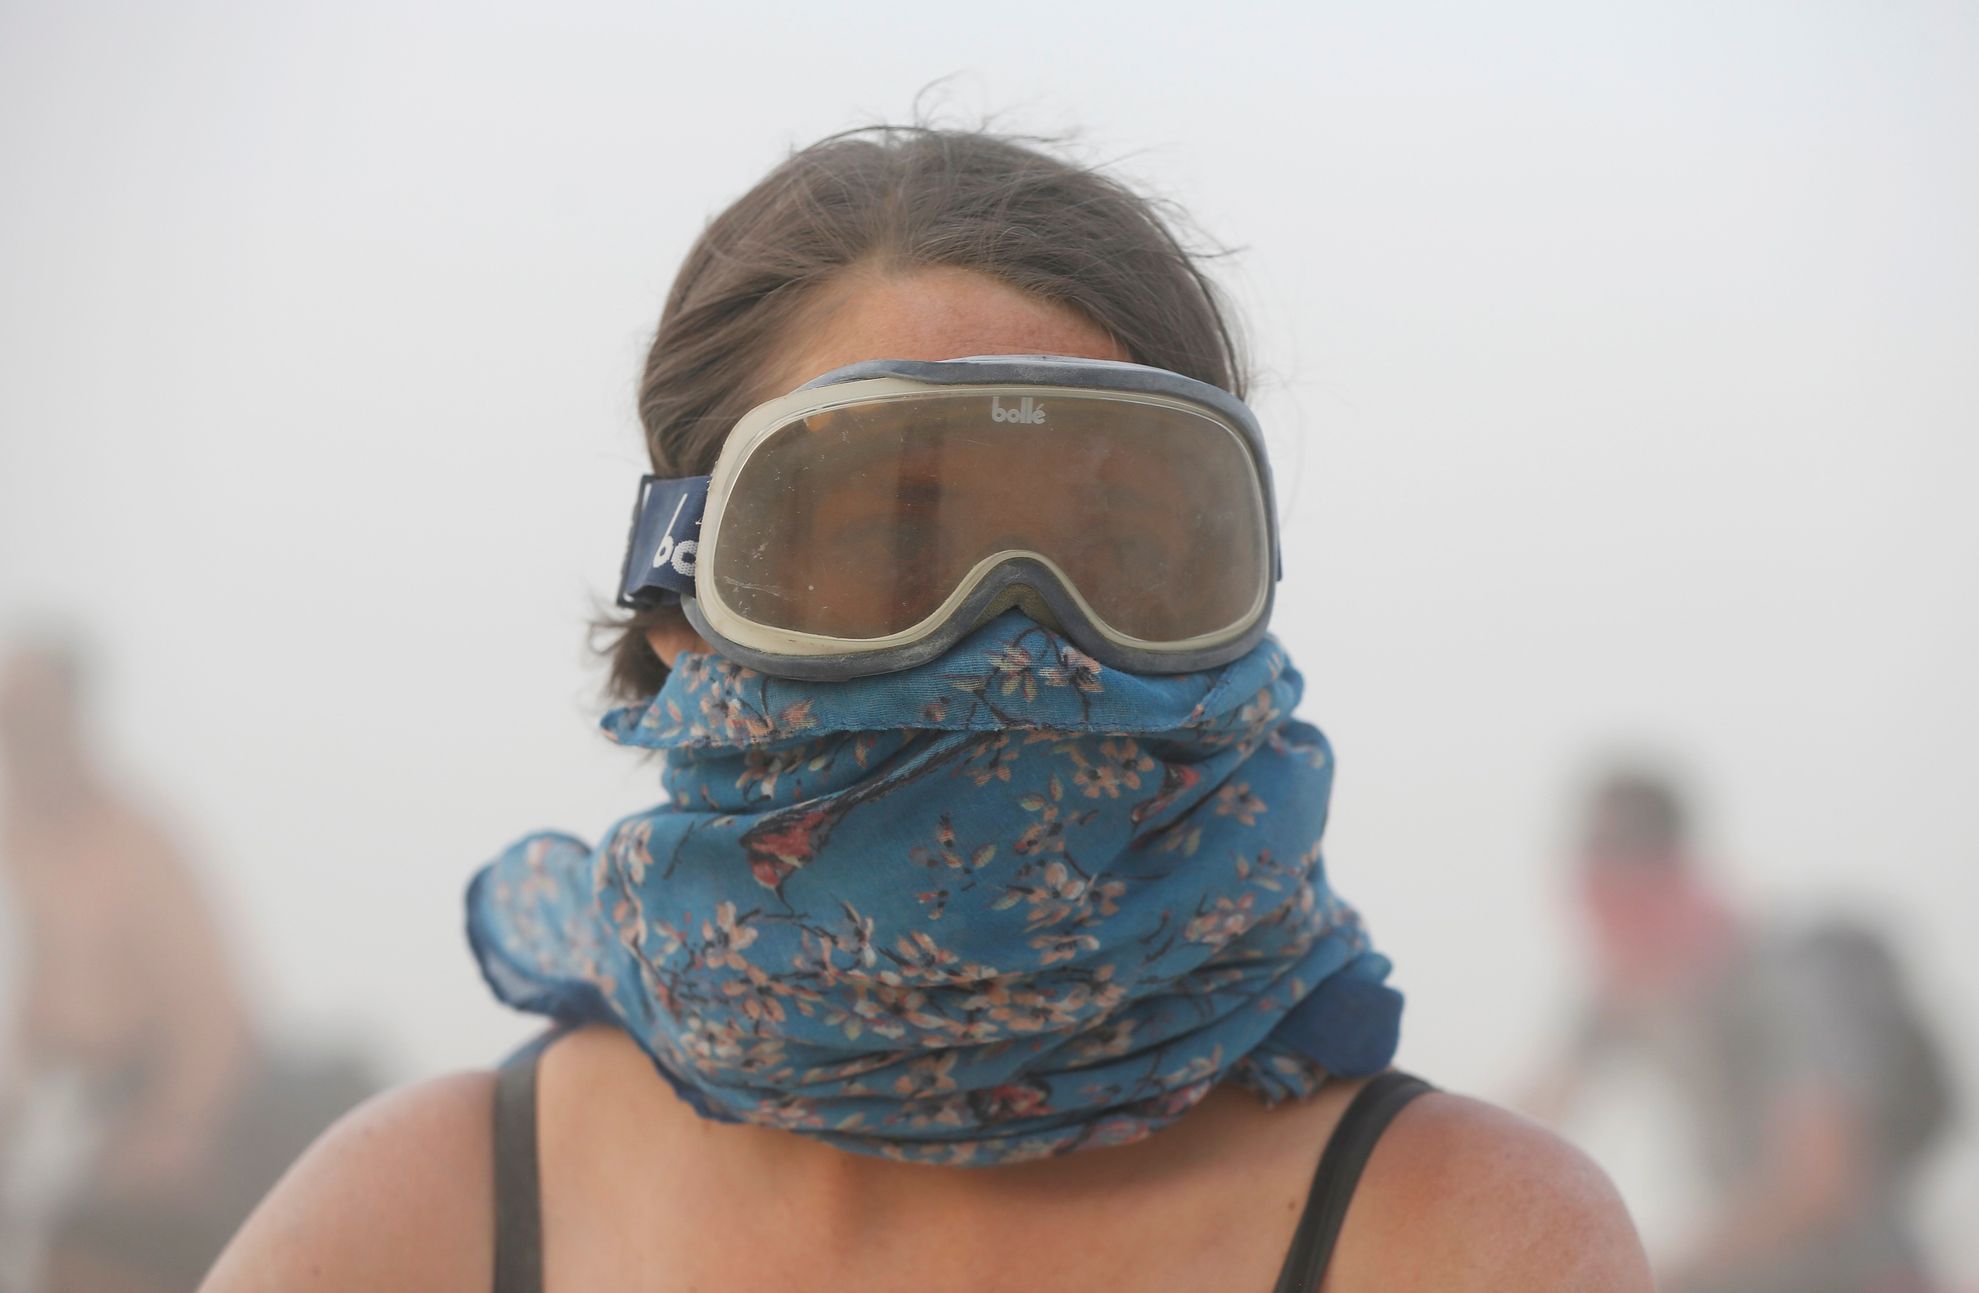 Grayson Morris navigates a dust storm during the Burning Man 2014 &quot;Caravansary&quot; arts and music festival in the Black Rock Desert of Nevada